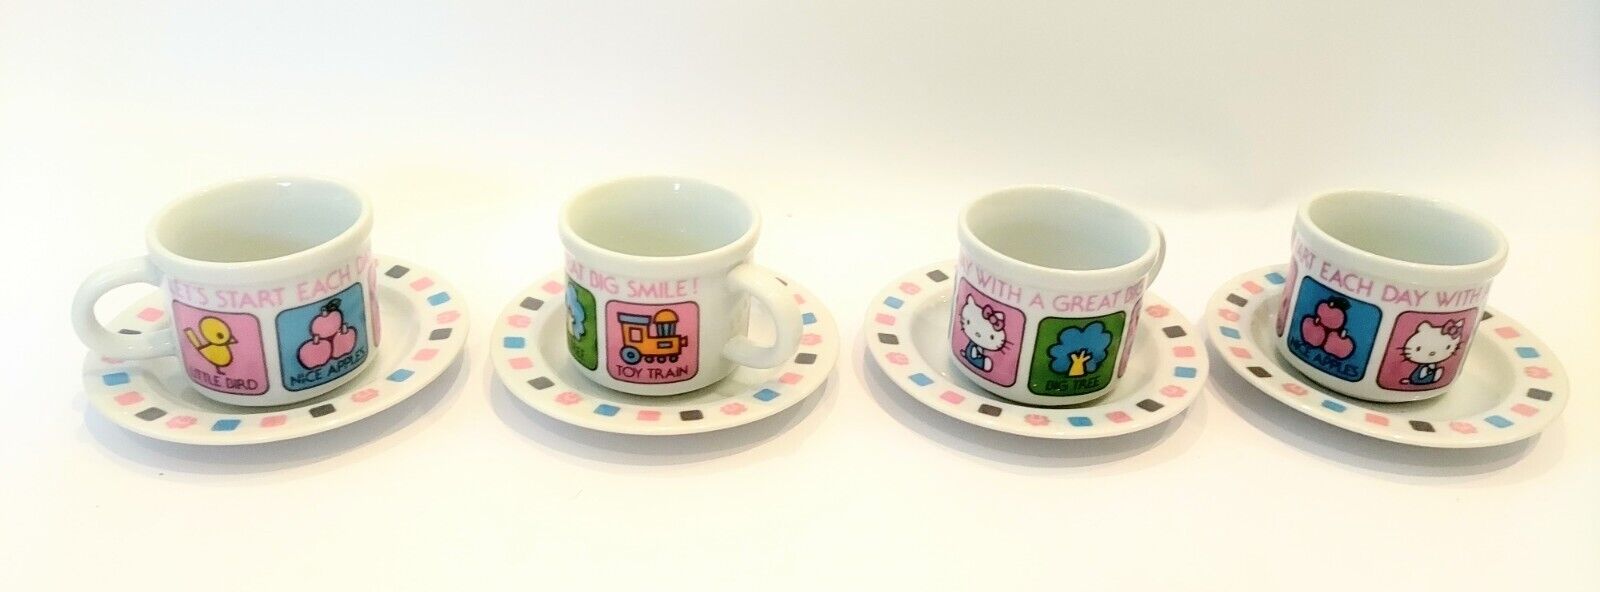 Sanrio 1976 Vintage Cup and Saucer Set of 4, Showa Retro, Rare, Made in Japan